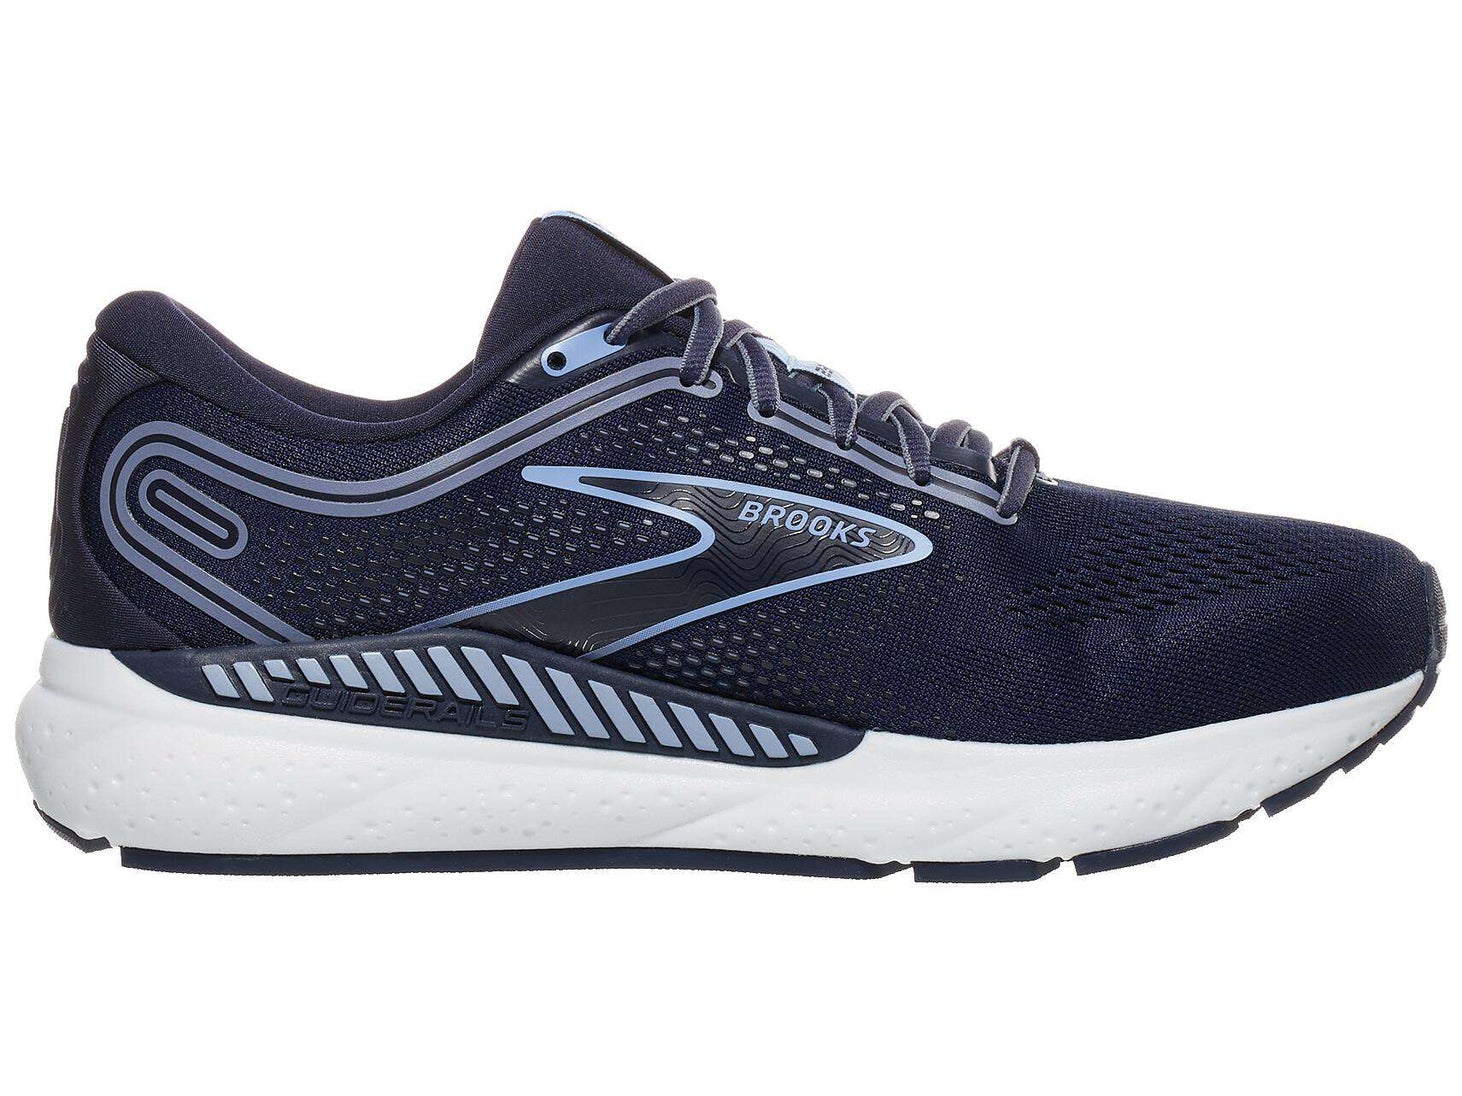 Best Wide Running Shoe for Motion Control Brooks Beast